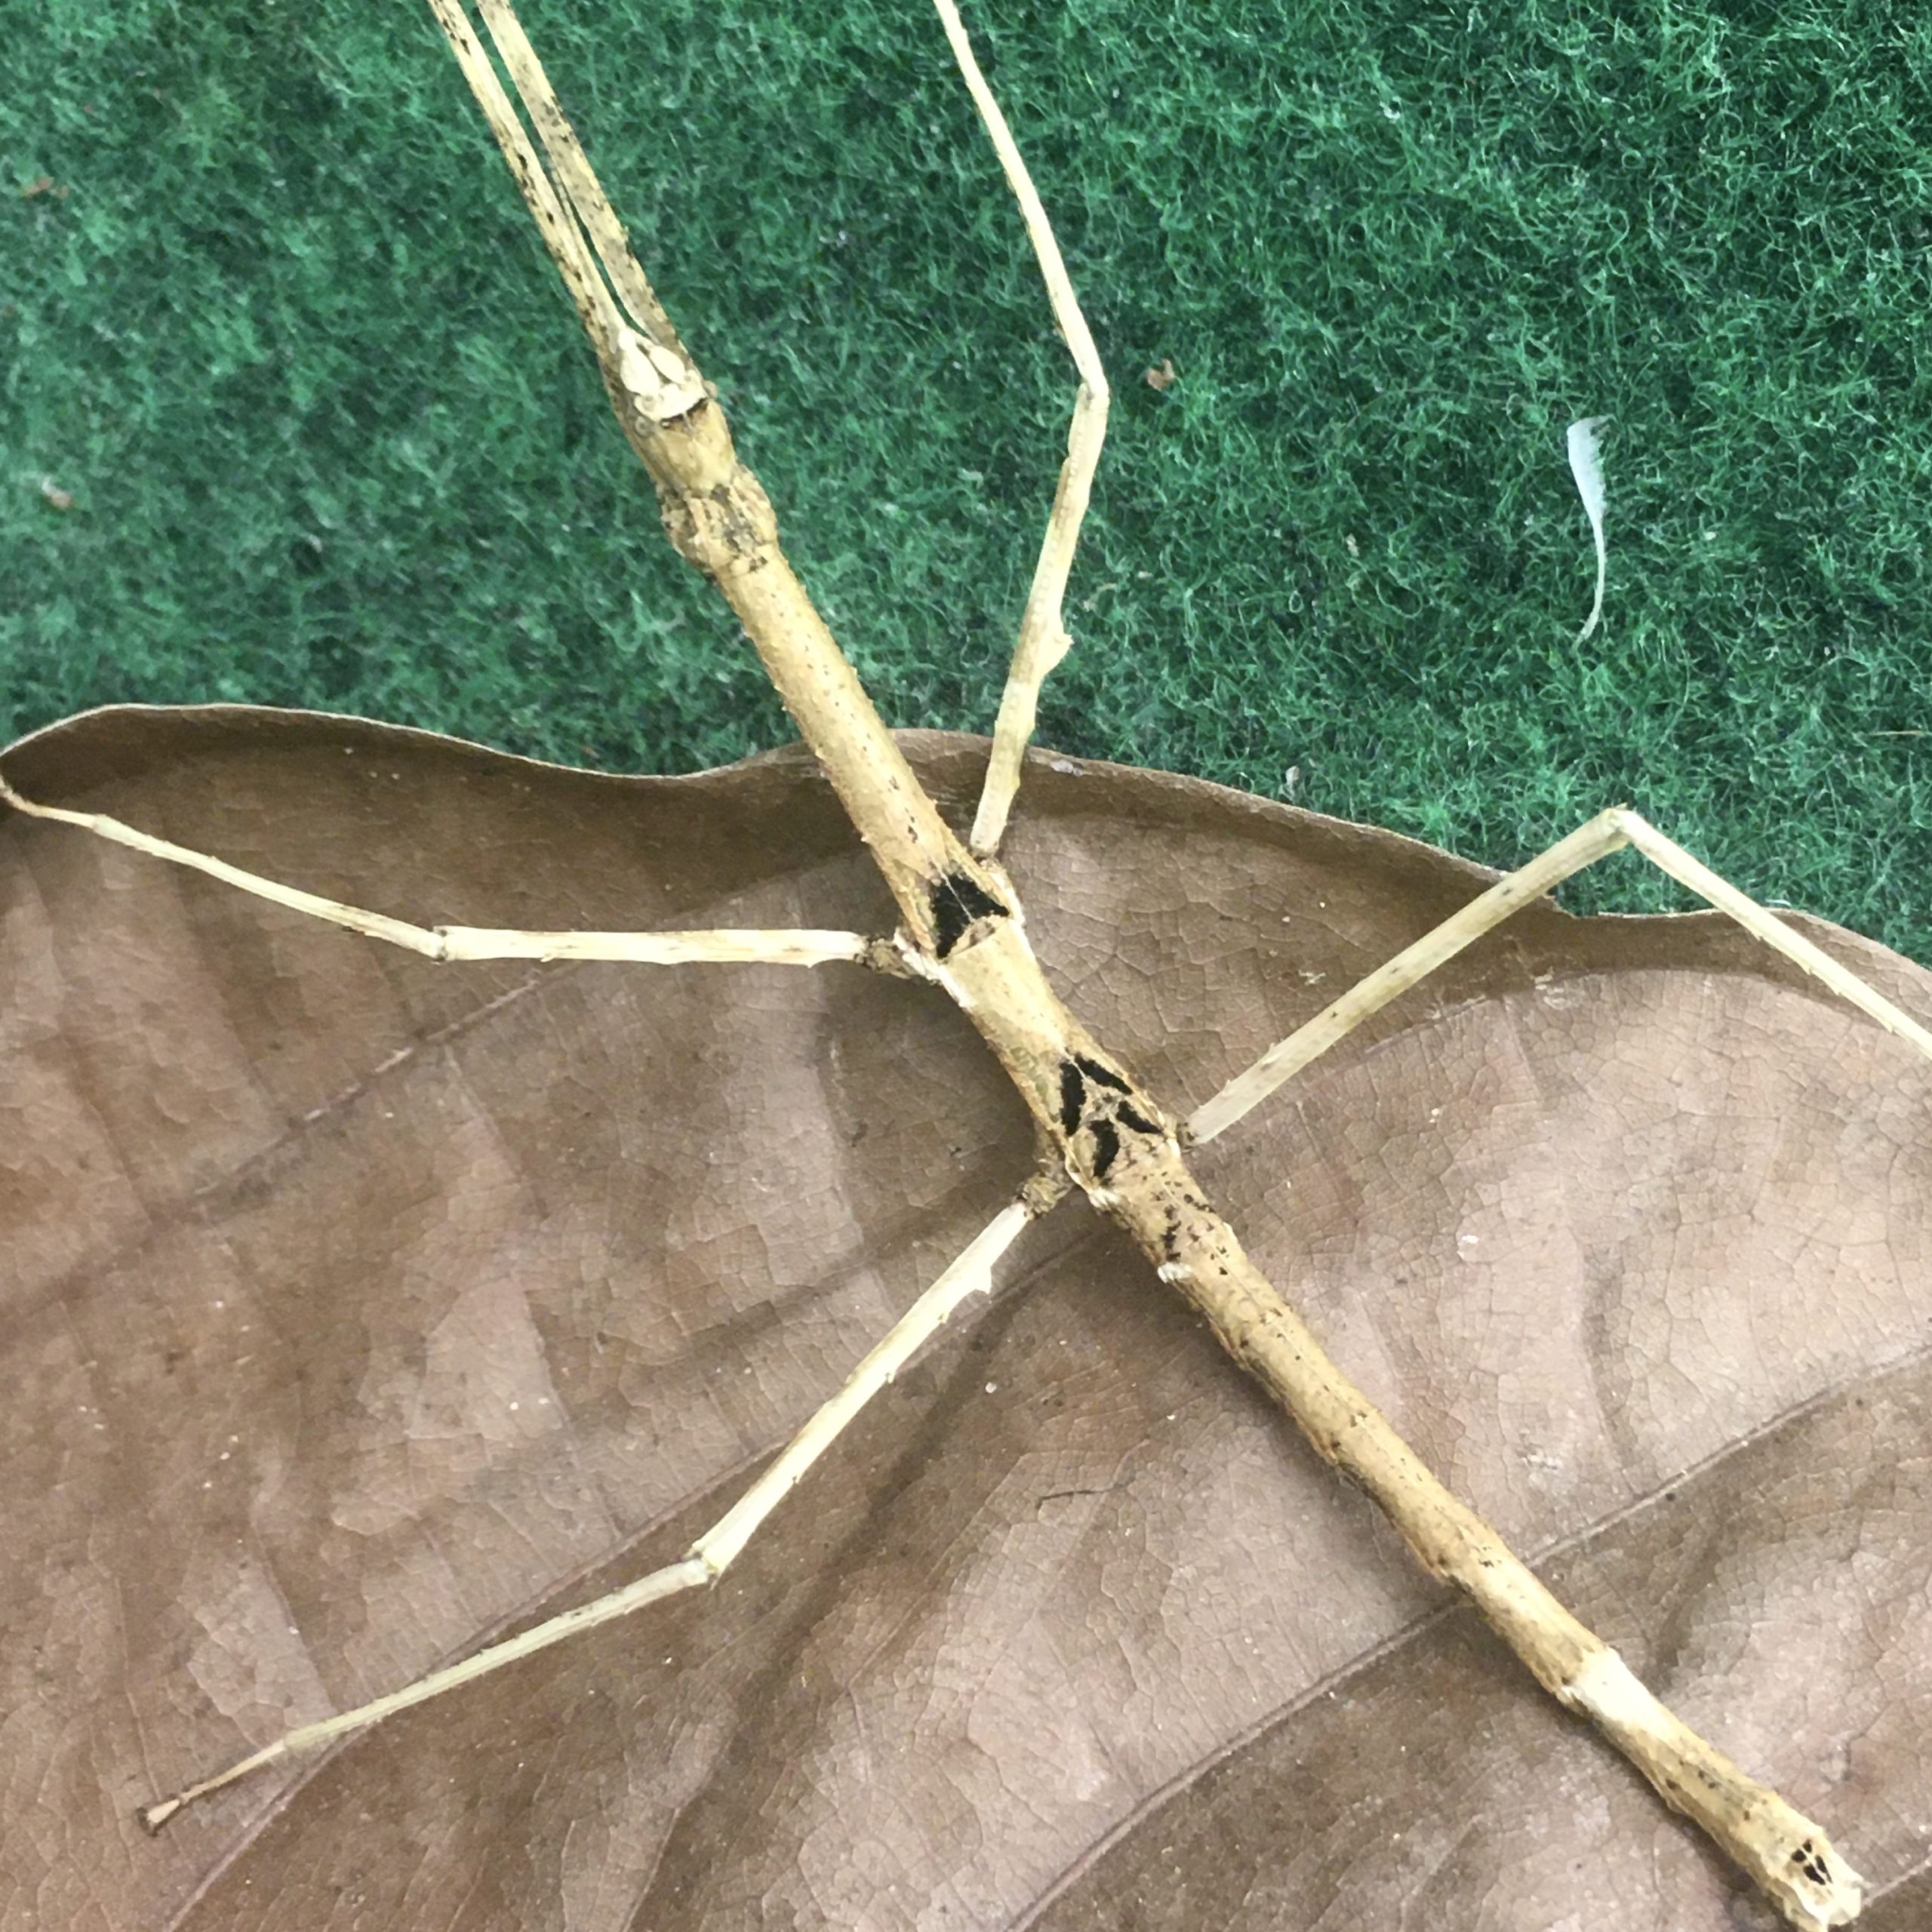 CB Thai Beauty Stick Insect